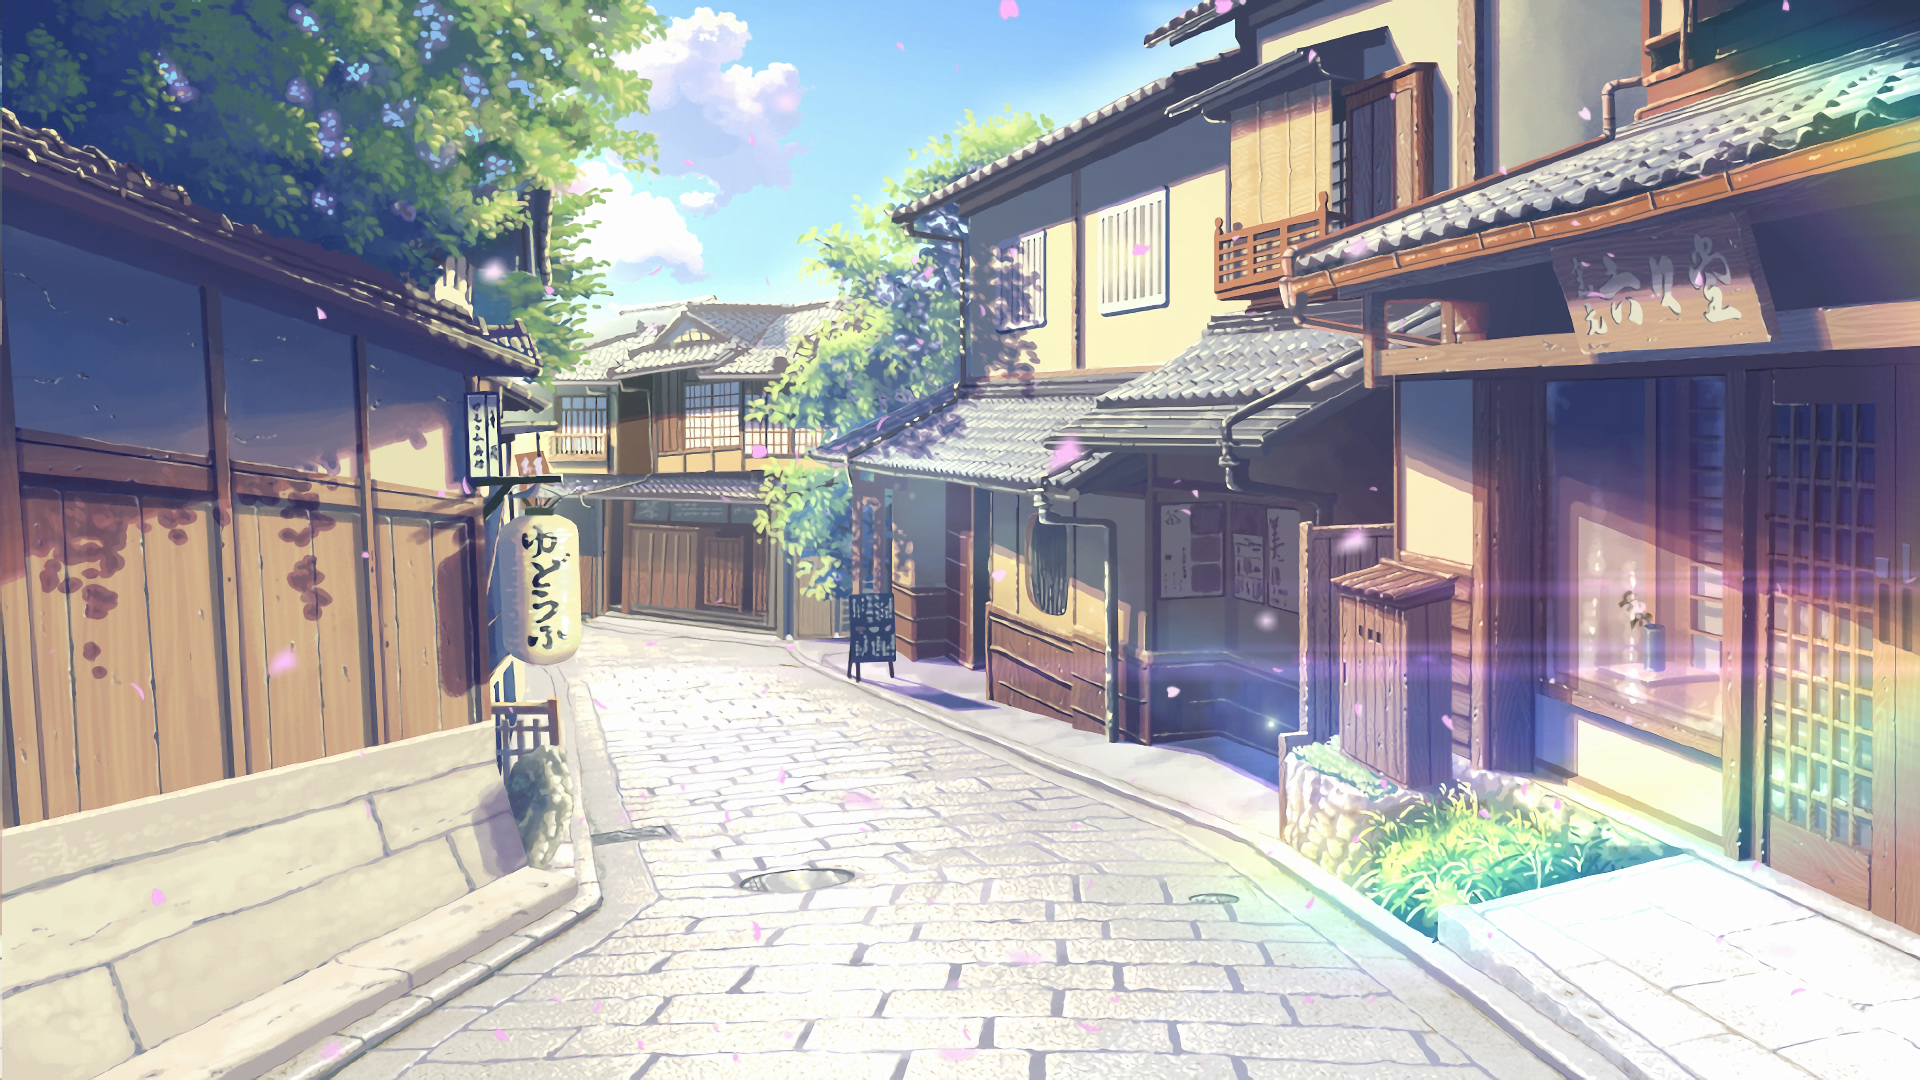 Sitahachi Artist on Twitter Street lt3 If you like please contact me  order background  street background anime japan sitahachi  httpstcoP7DjhDbWP0  Twitter